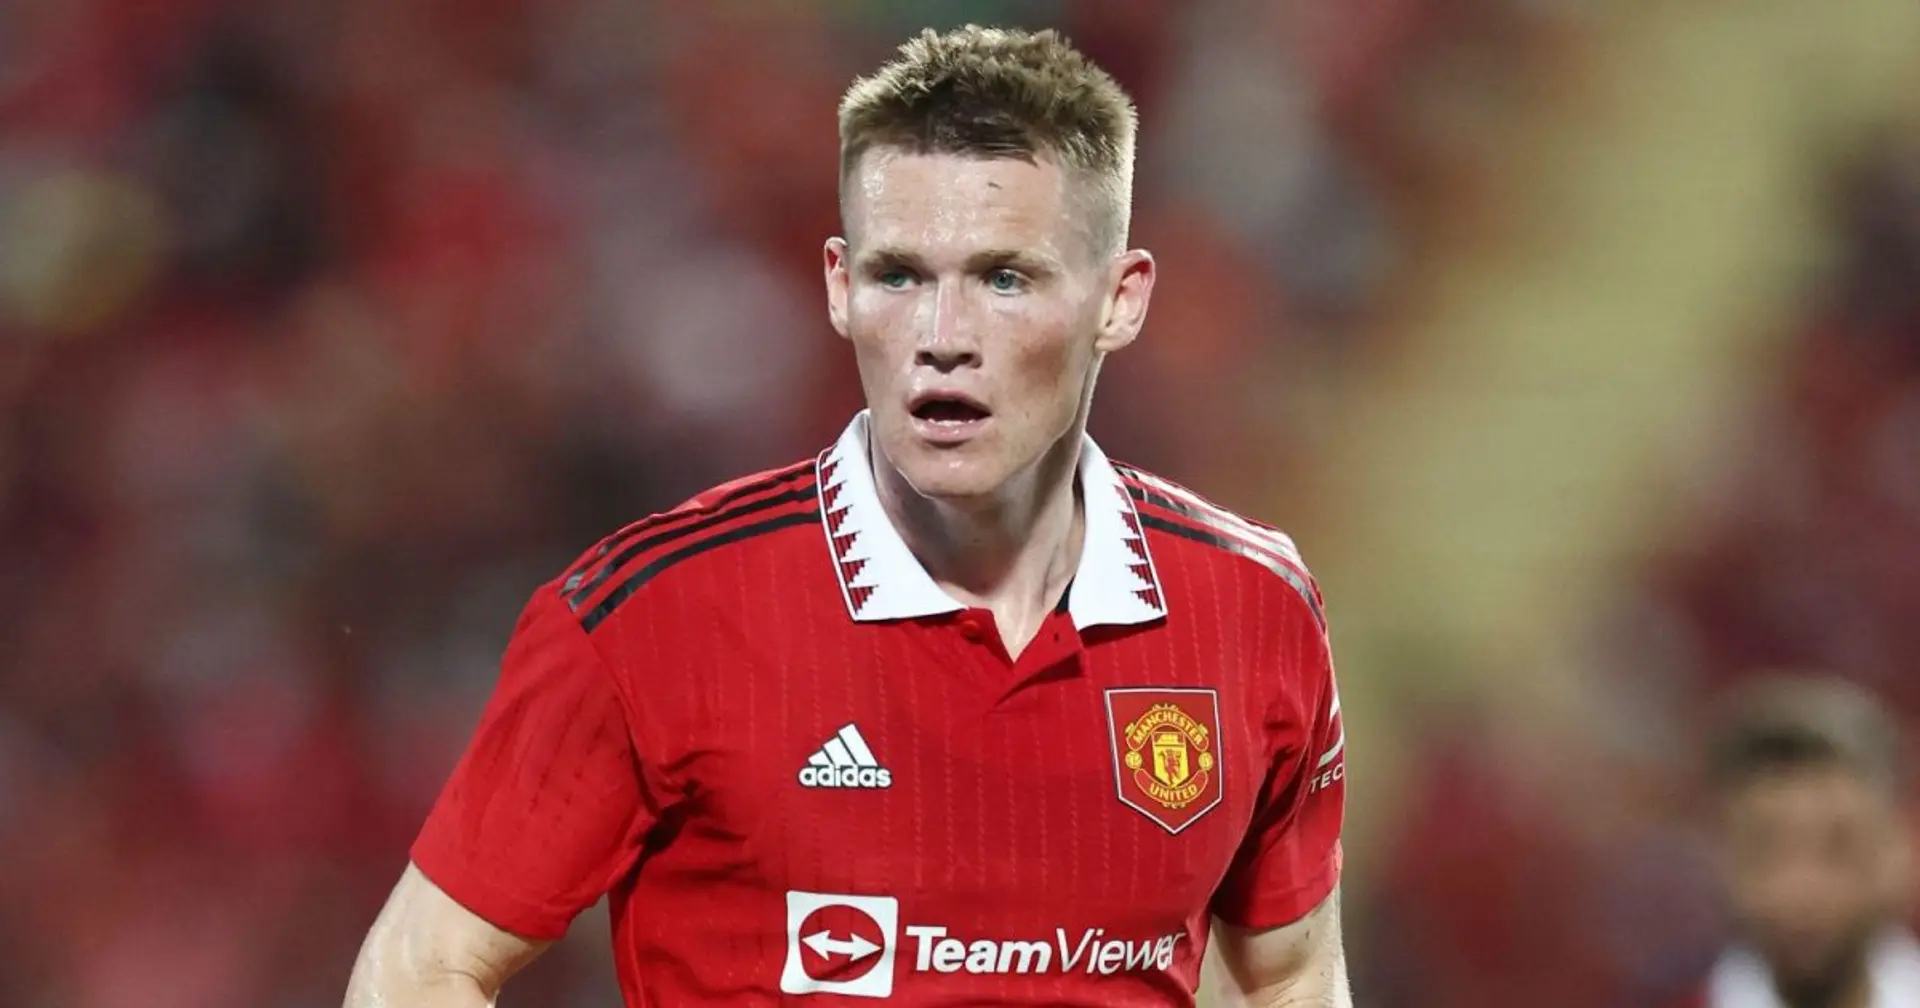 'He has work ethic, turn of pace, aggressiveness in the tackle': Man United fans have faith in Scott McTominay